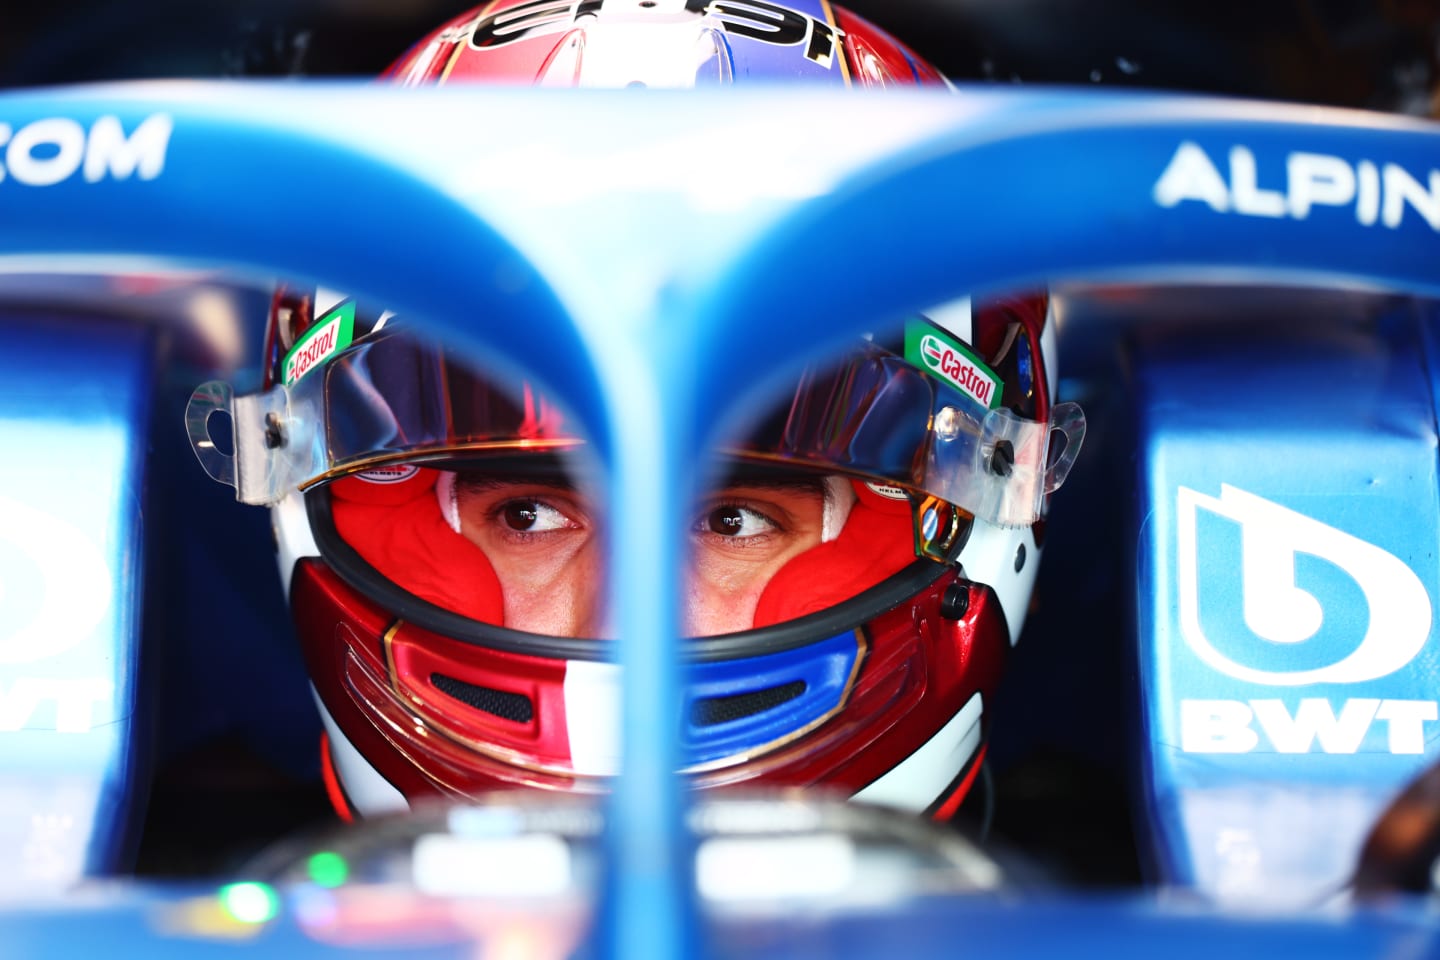 ZANDVOORT, NETHERLANDS - SEPTEMBER 02: Esteban Ocon of France and Alpine F1 prepares to drive in the garage during practice ahead of the F1 Grand Prix of The Netherlands at Circuit Zandvoort on September 02, 2022 in Zandvoort, Netherlands. (Photo by Alex Pantling - Formula 1/Formula 1 via Getty Images)